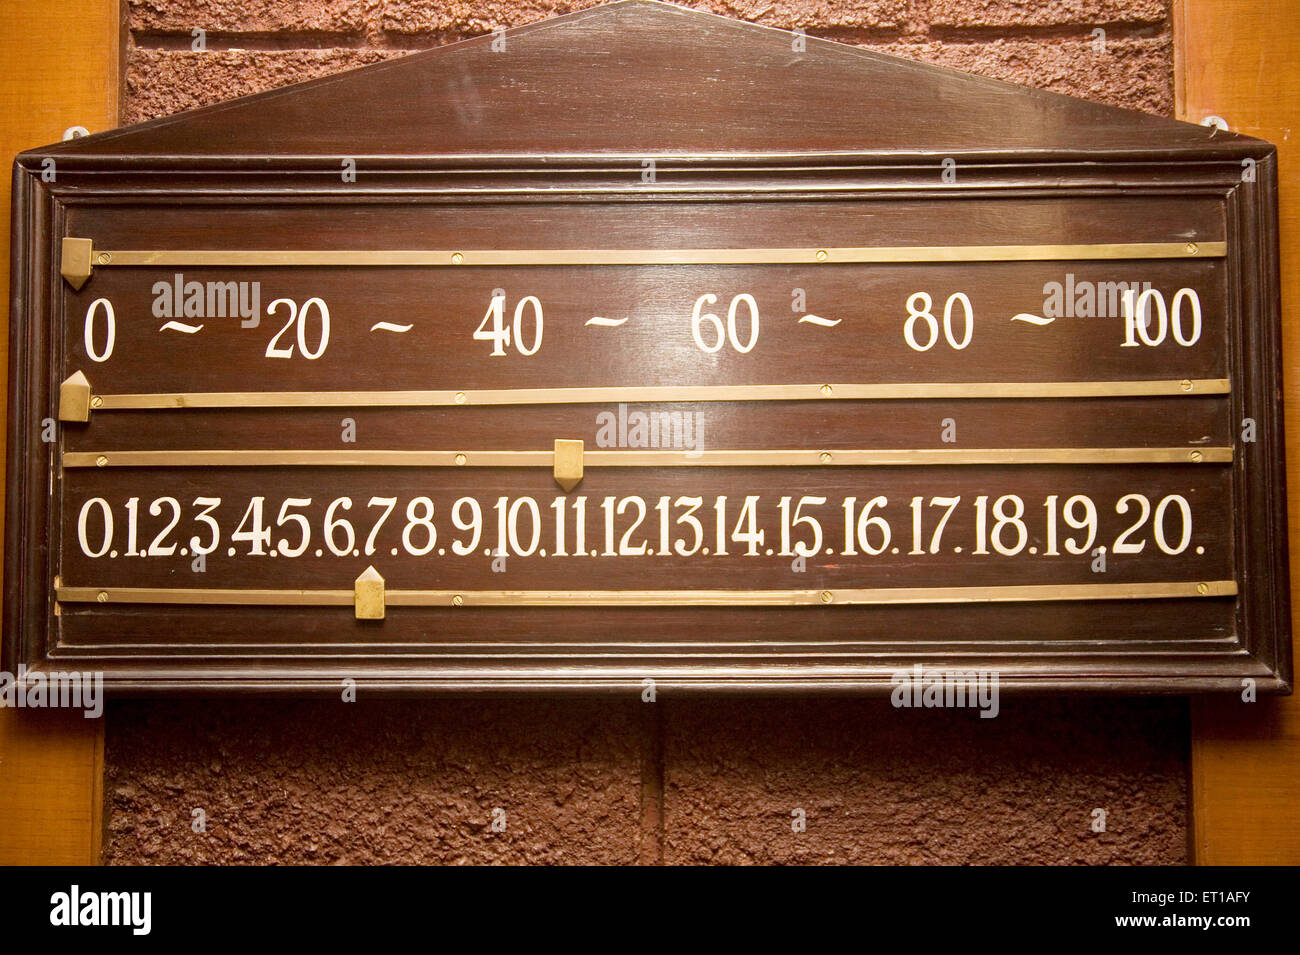 Wooden billiard score board with numbers written in white color Stock Photo